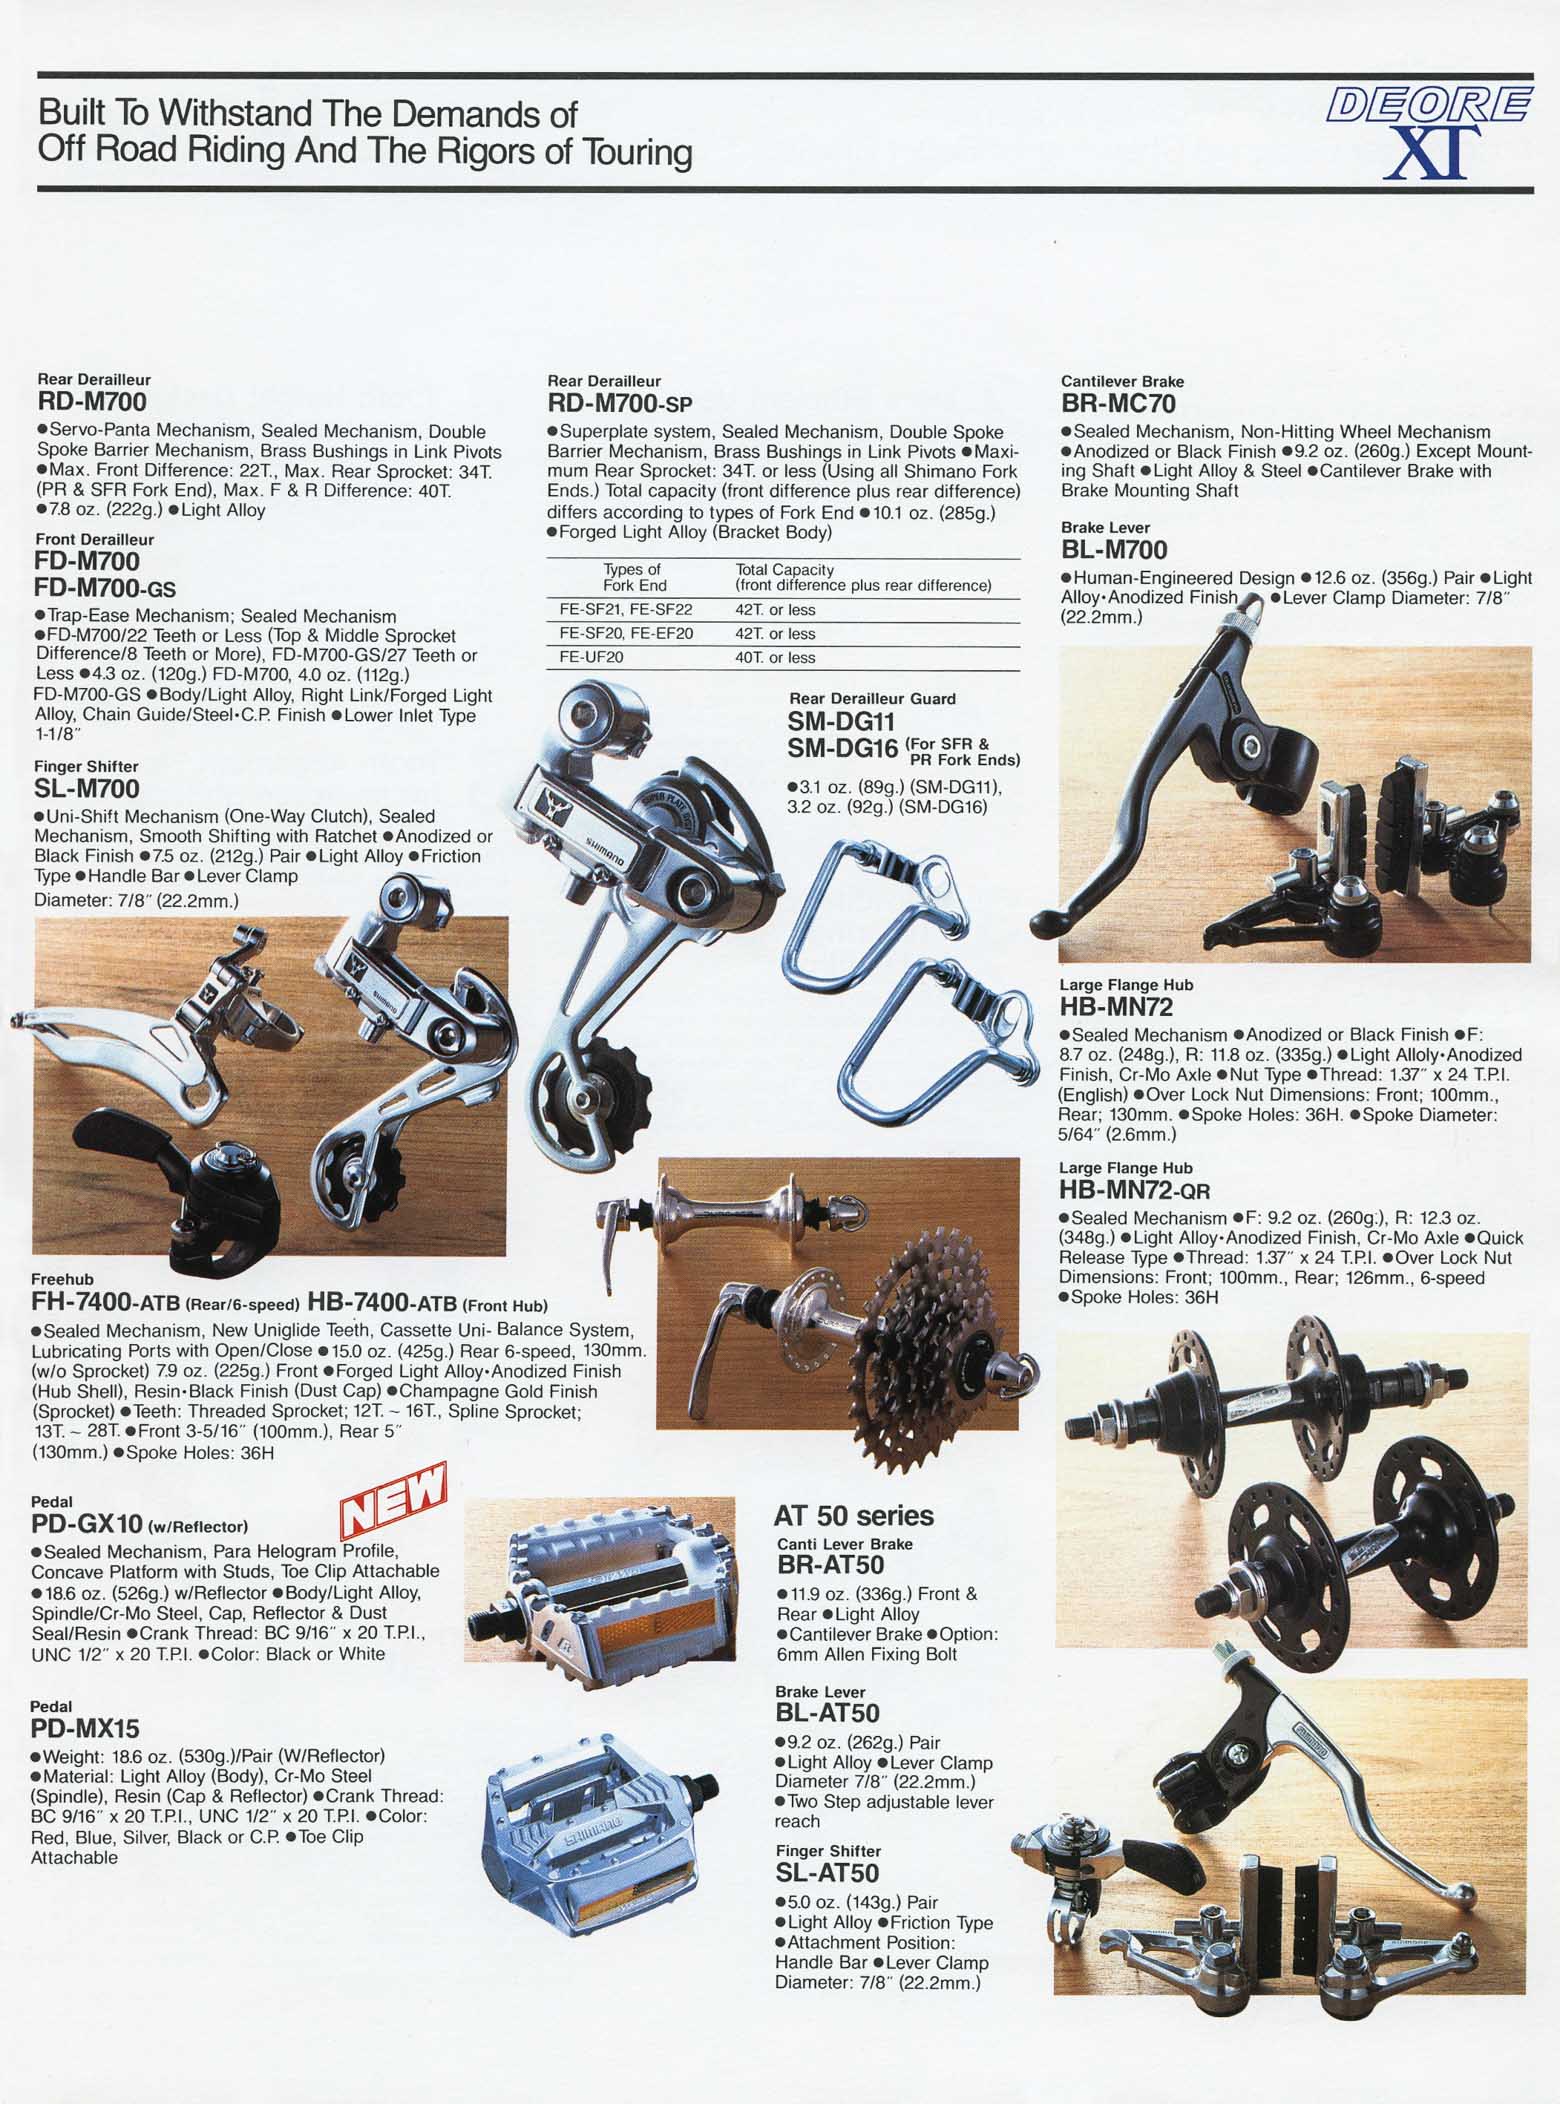 Complete Line of Shimano System Components (January 1986) scan 15 main image